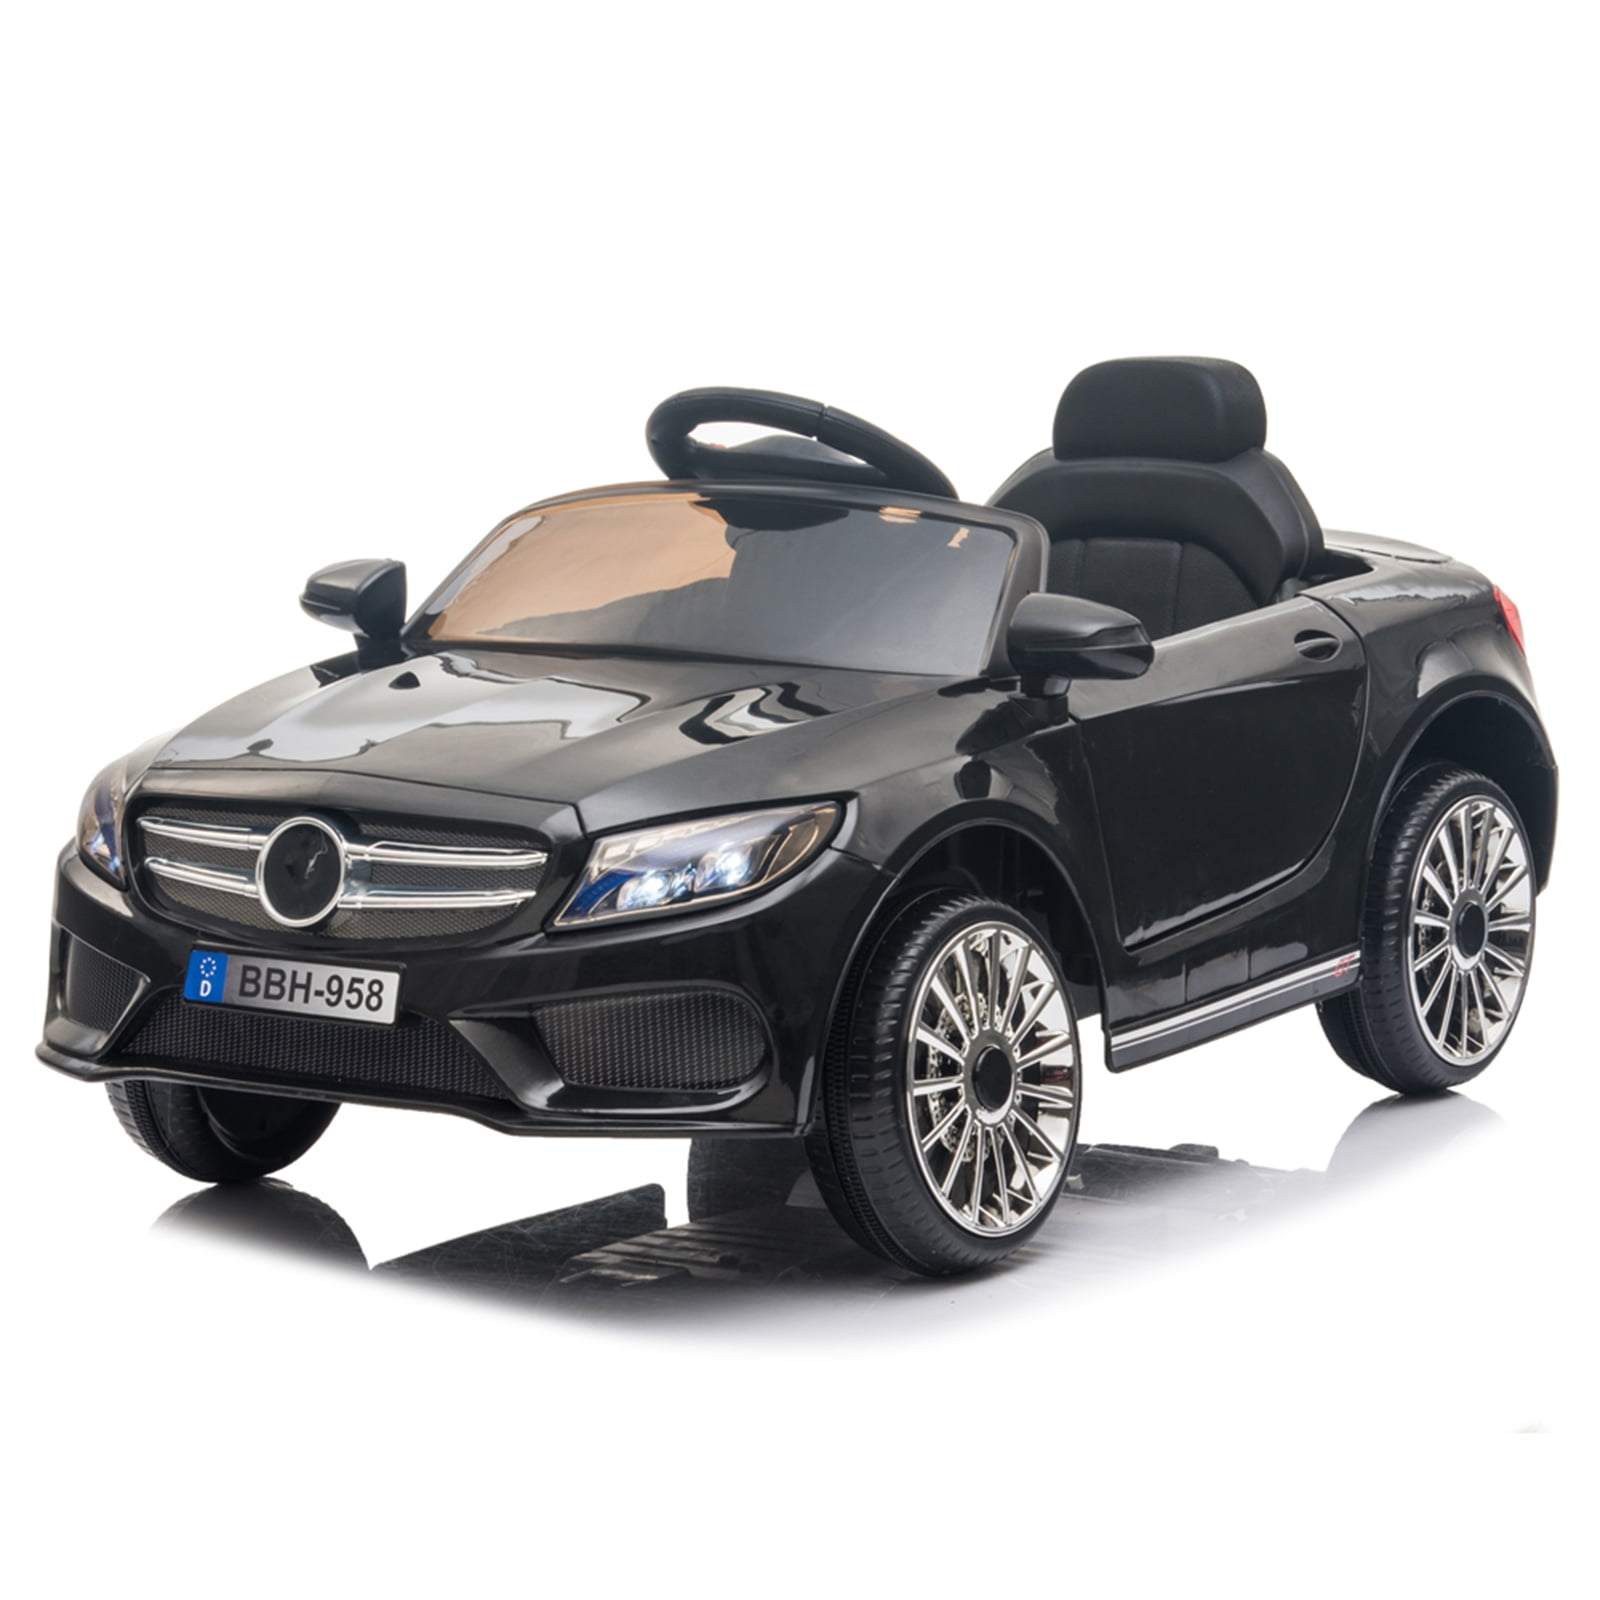 Kids Ride On Car, Powered Car Toys, 2.4GHZ Remote Control Car, 12V Battery Operated with LED Lights, Perfect Gift for 1 to 4 Years Old Boys and Girls